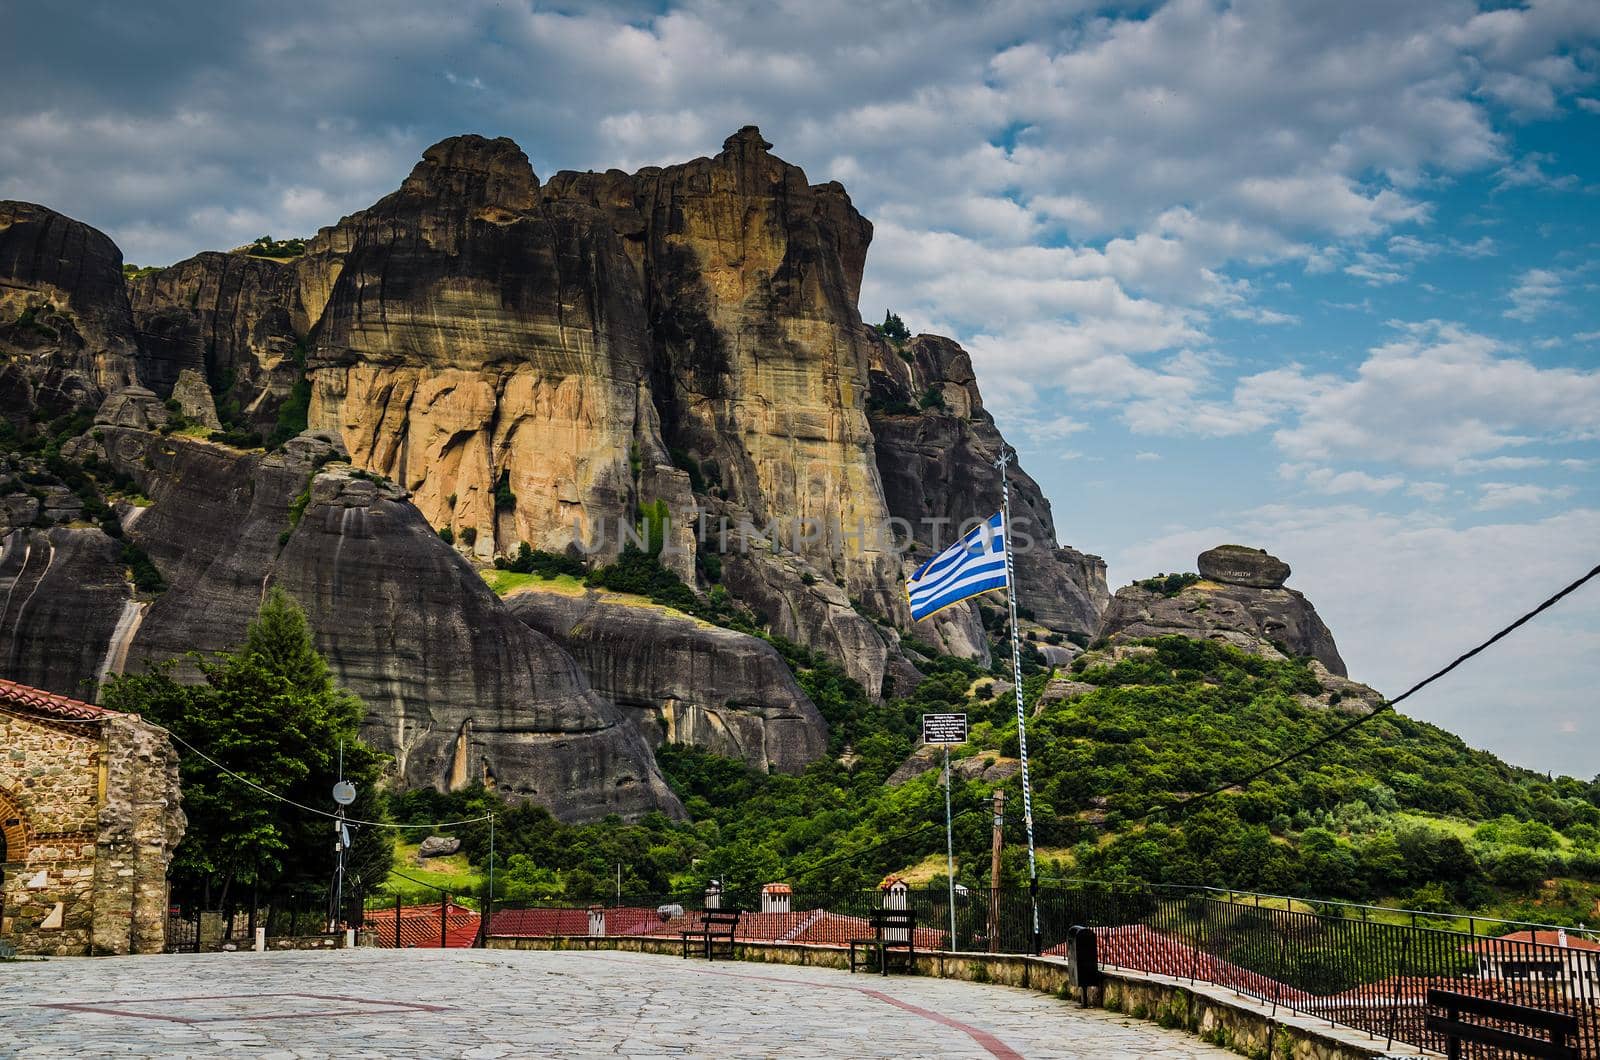 Meteora Rocks with famous monasteries seen from town Kalabaka, Greece